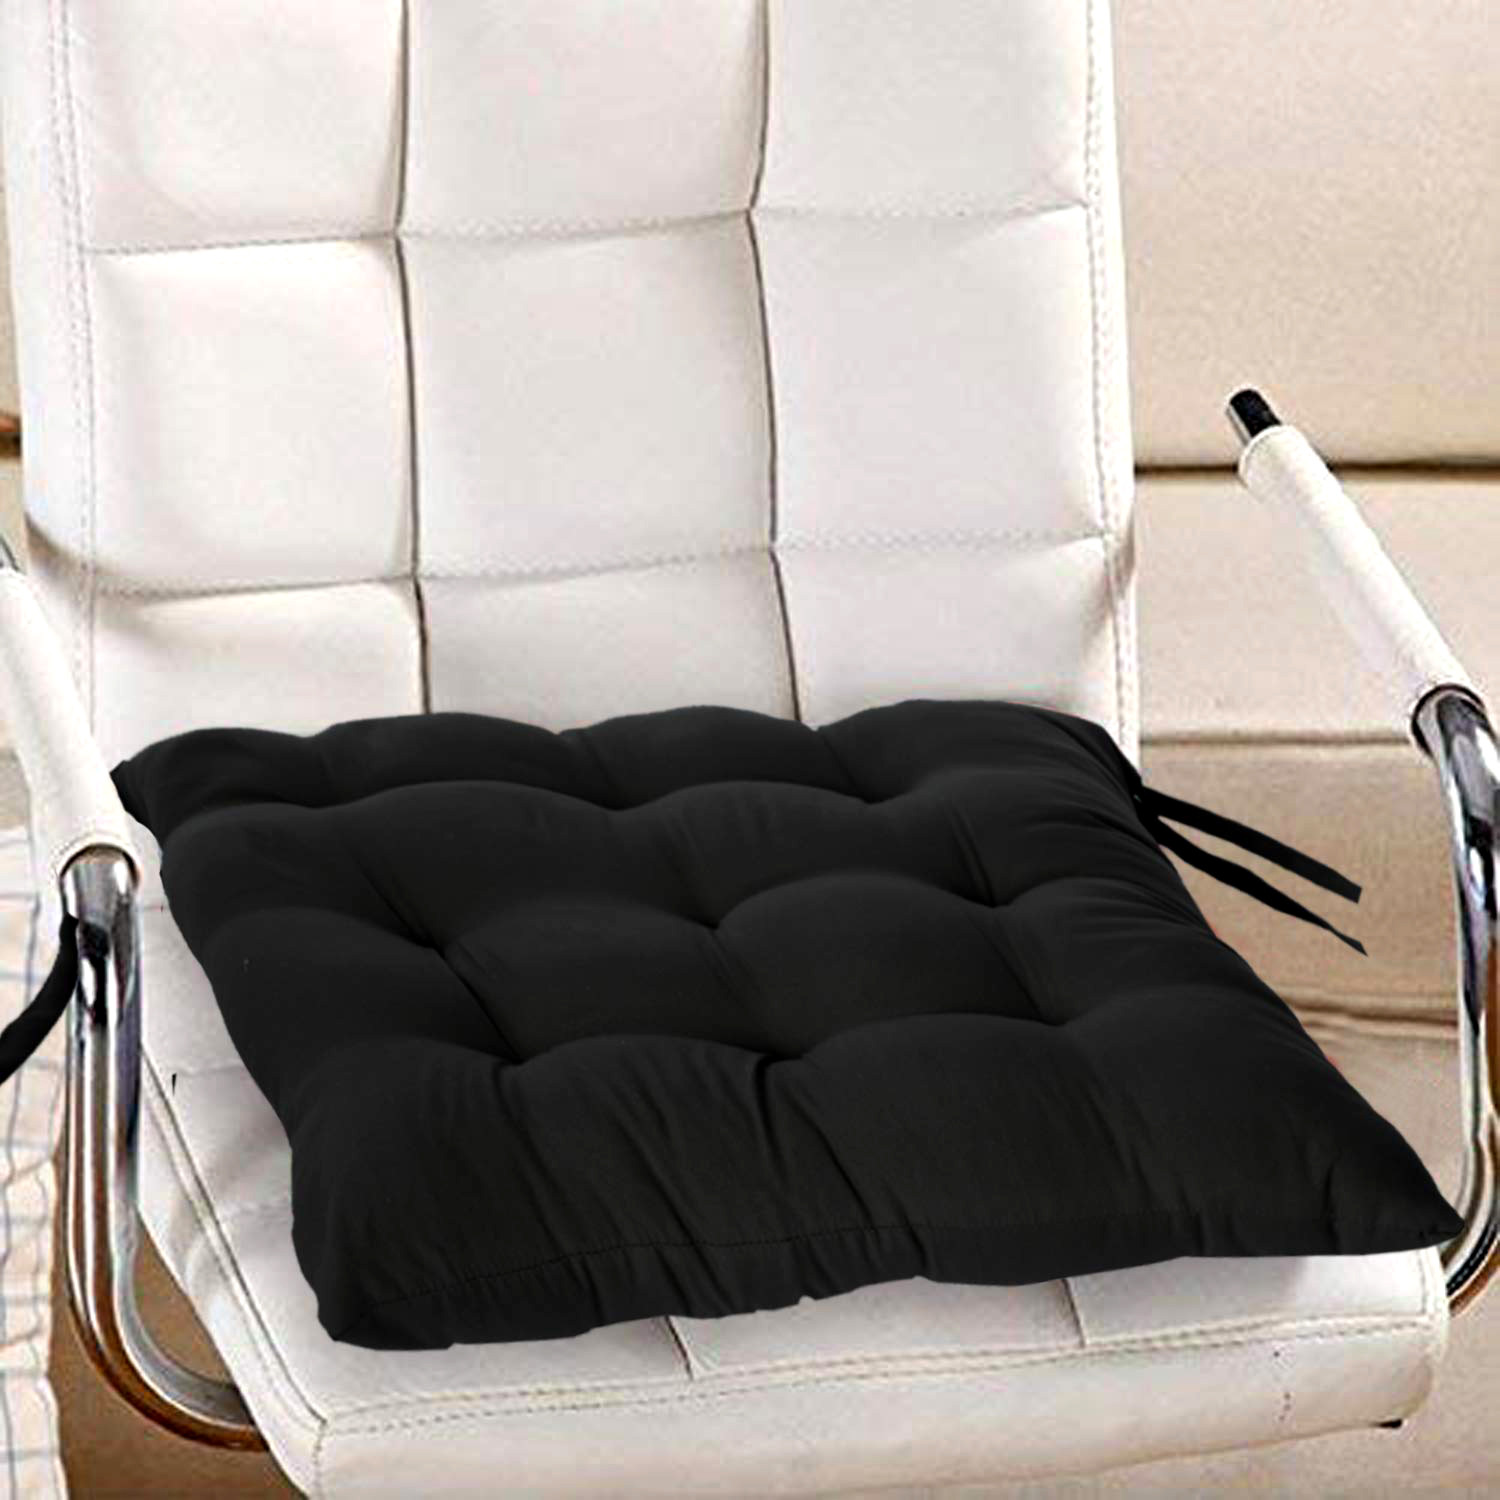 Kuber Industries Microfiber 18*48 Inch Back And Seat Chair Cushion & 18*18 Inch Square Cushion for Rocking Chair, Desk chair, Dining chairs, Lounge chair with Ties- Set of 2 (Black)